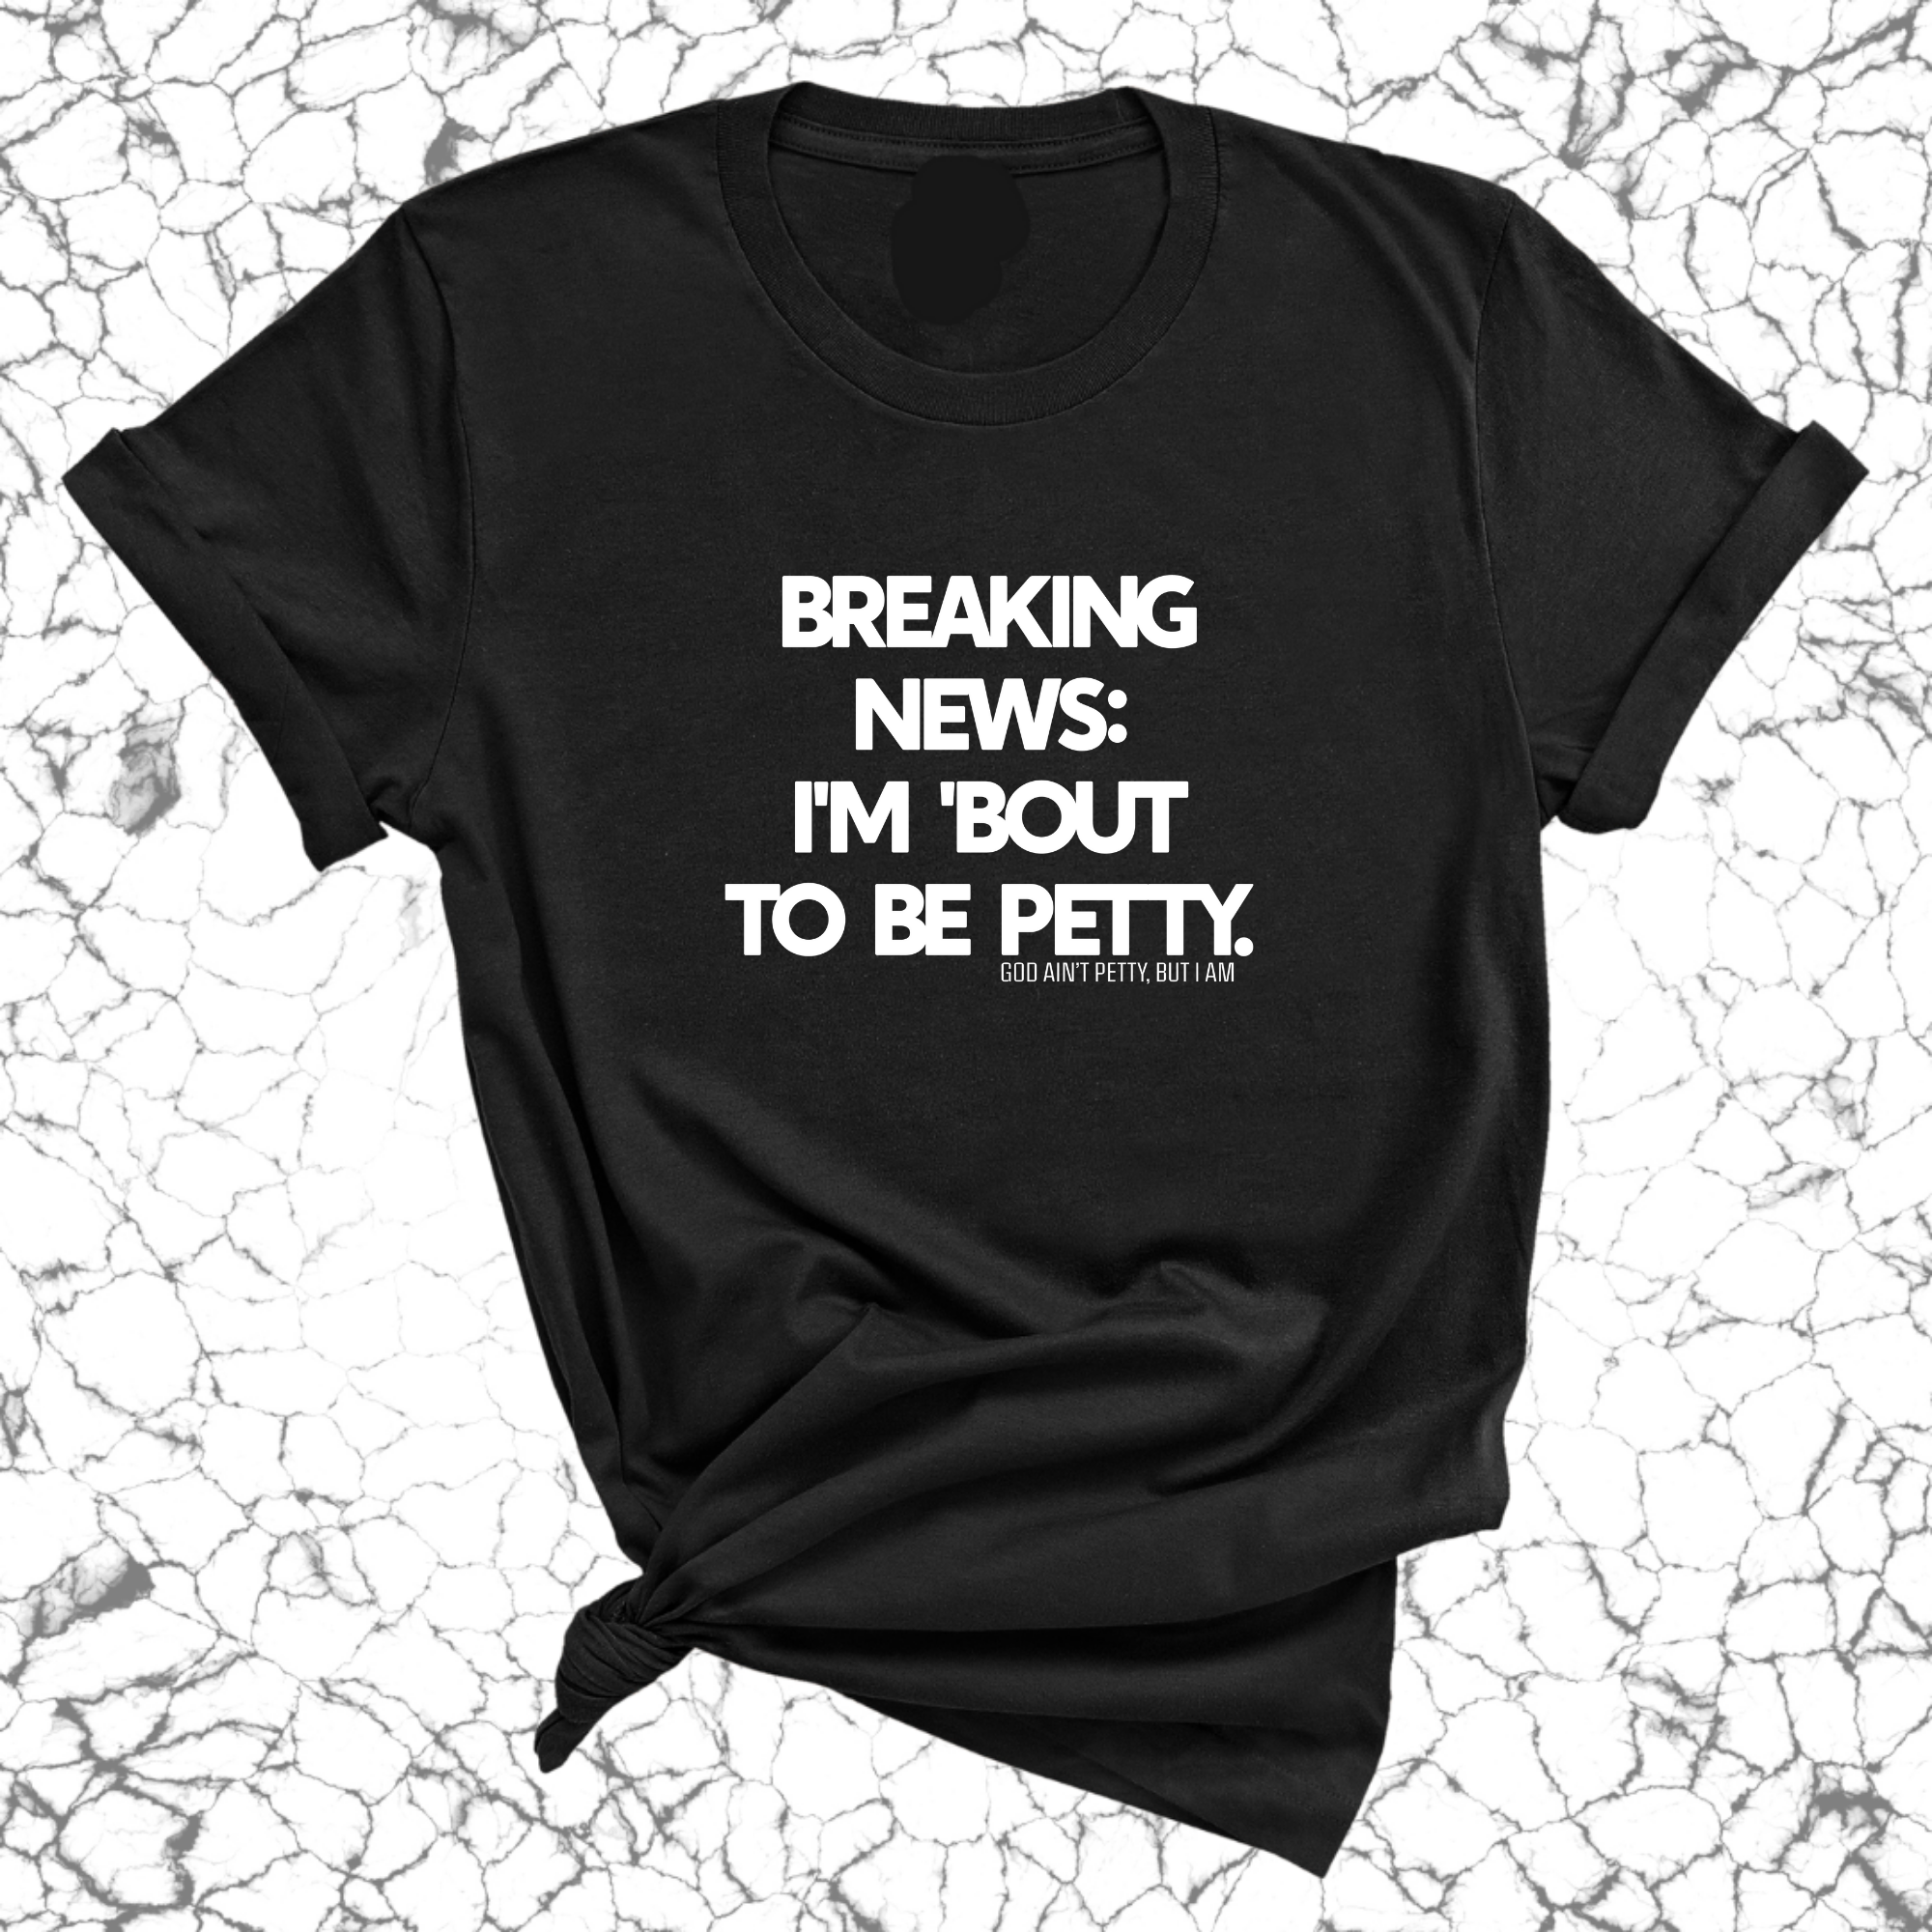 Breaking News: I'm 'bout to be Petty Unisex Tee **BLACK**-T-Shirt-The Original God Ain't Petty But I Am